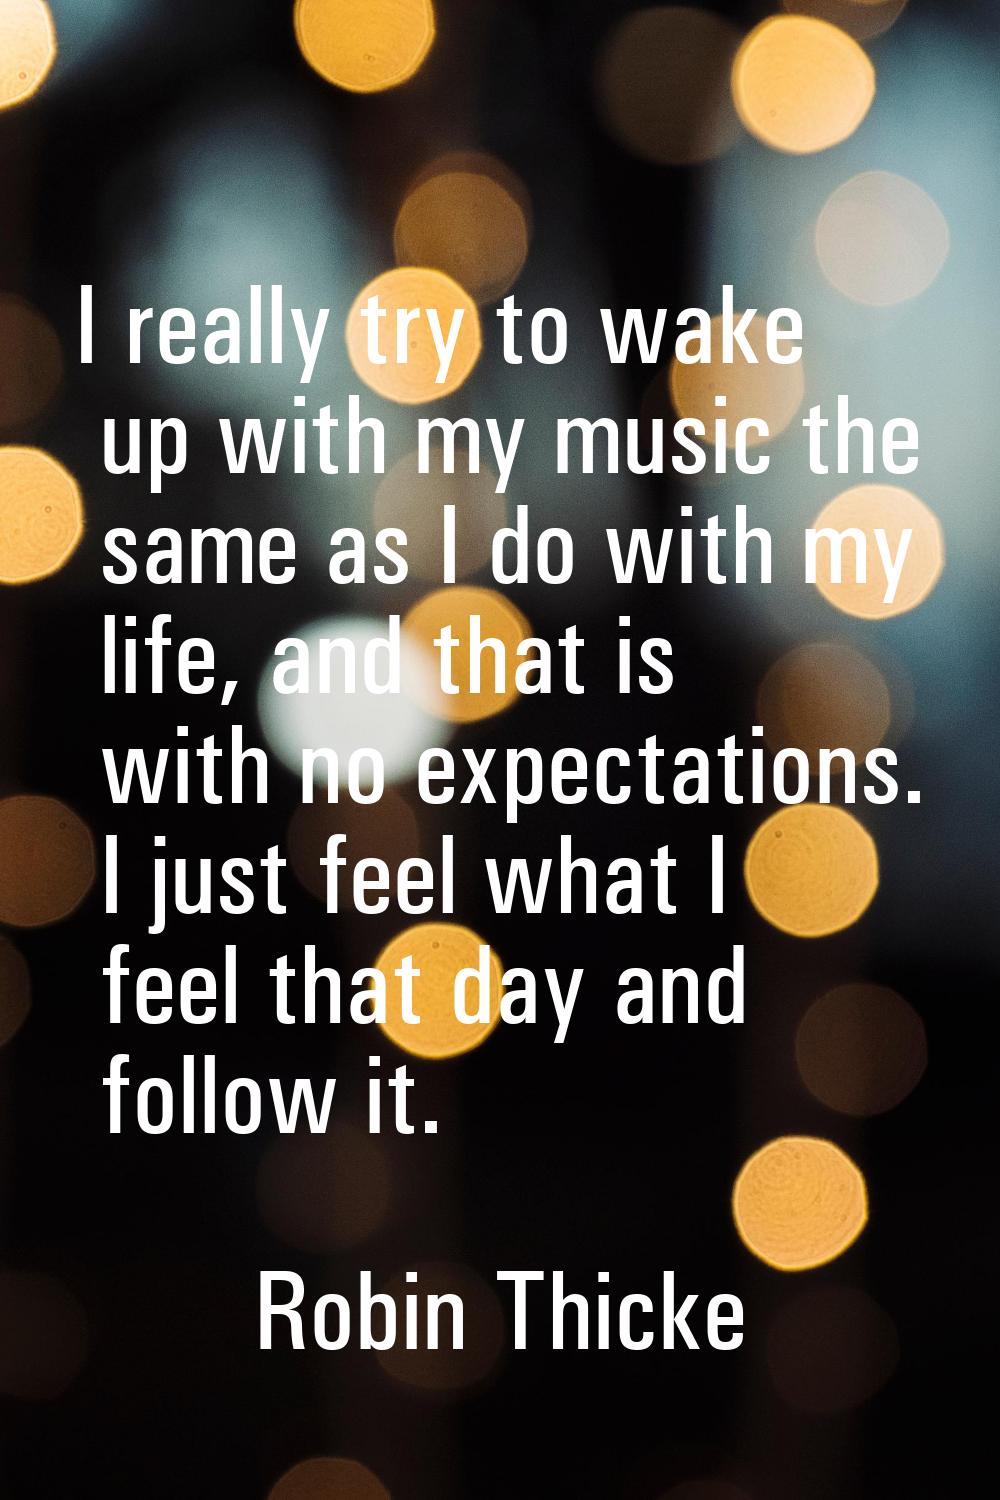 I really try to wake up with my music the same as I do with my life, and that is with no expectatio